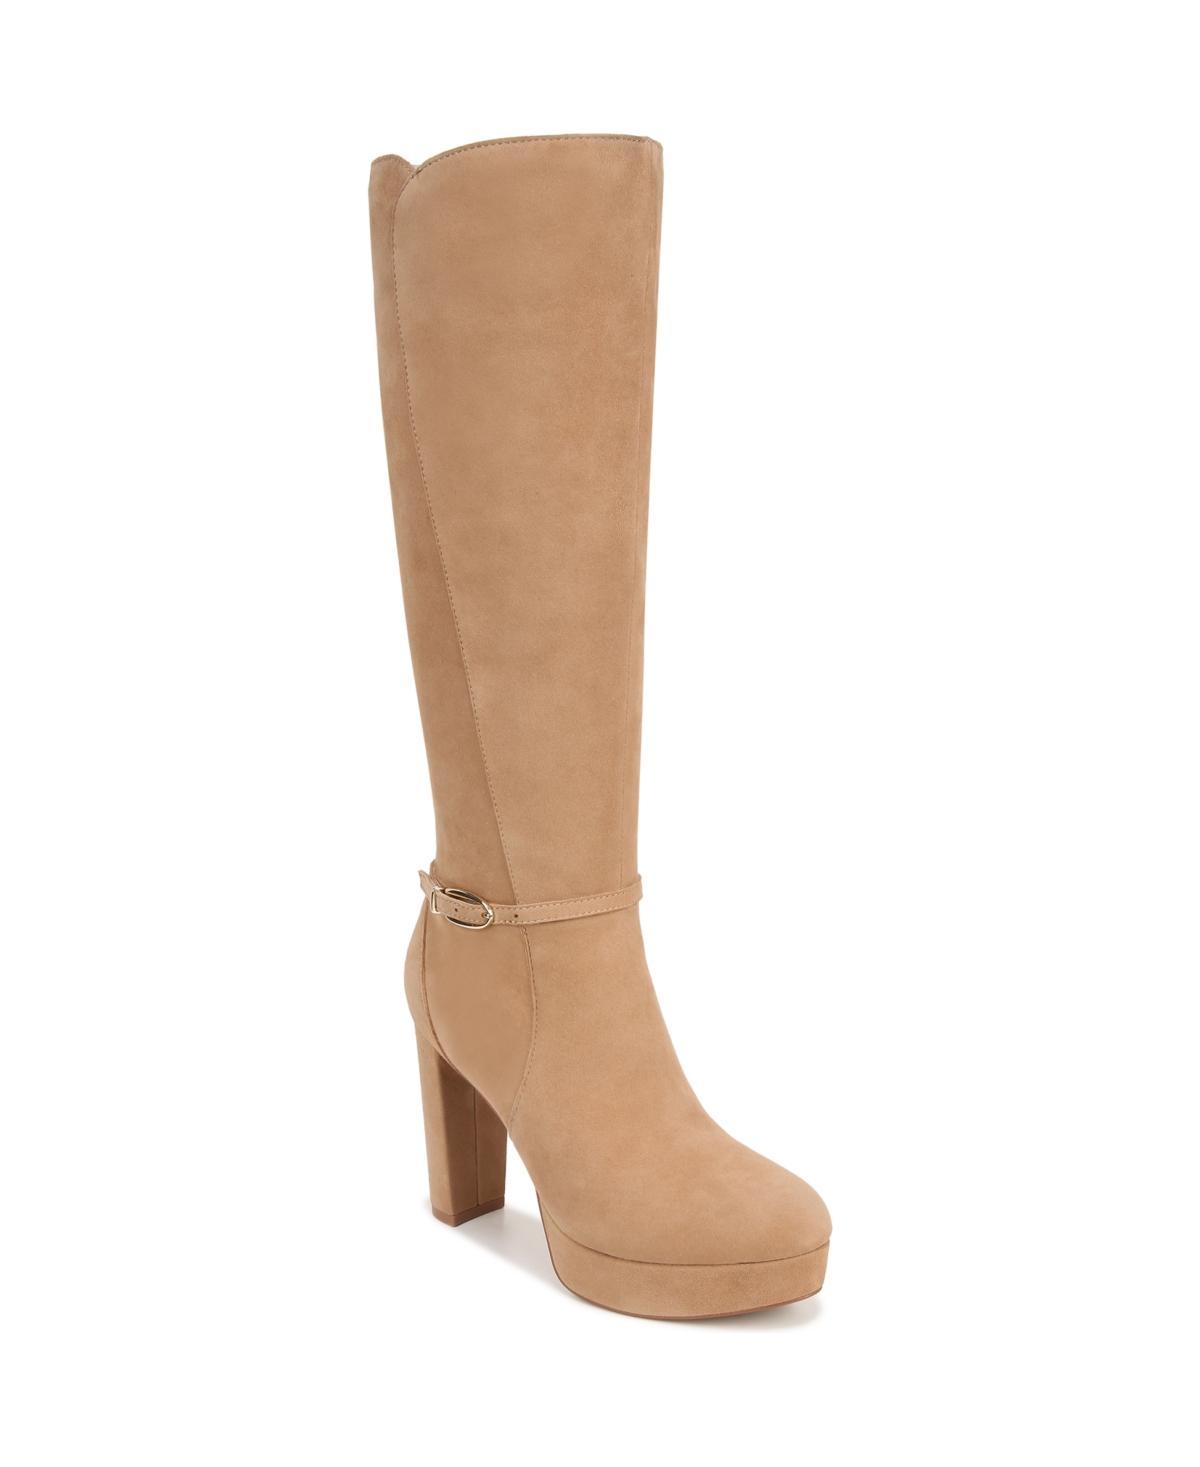 Naturalizer Fenna Knee High Boot Product Image